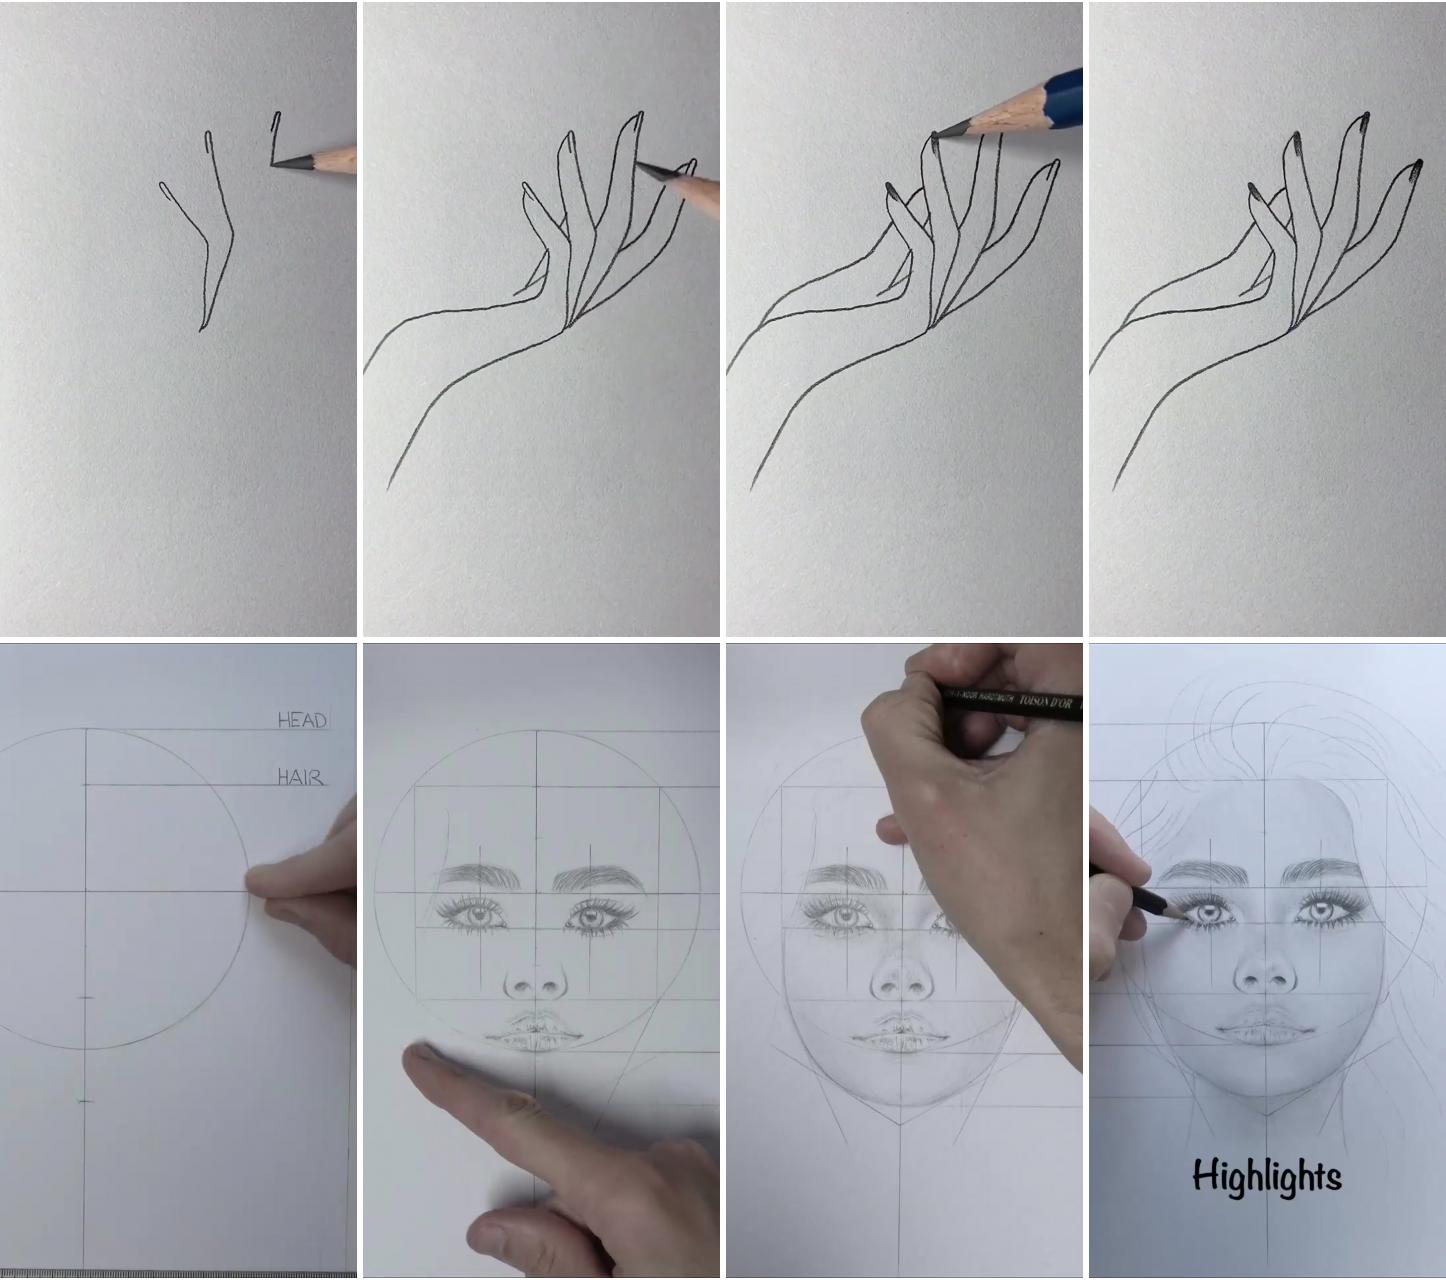 Lady hand drawing, lady land sketching | how to draw a face credit goes to respective owners